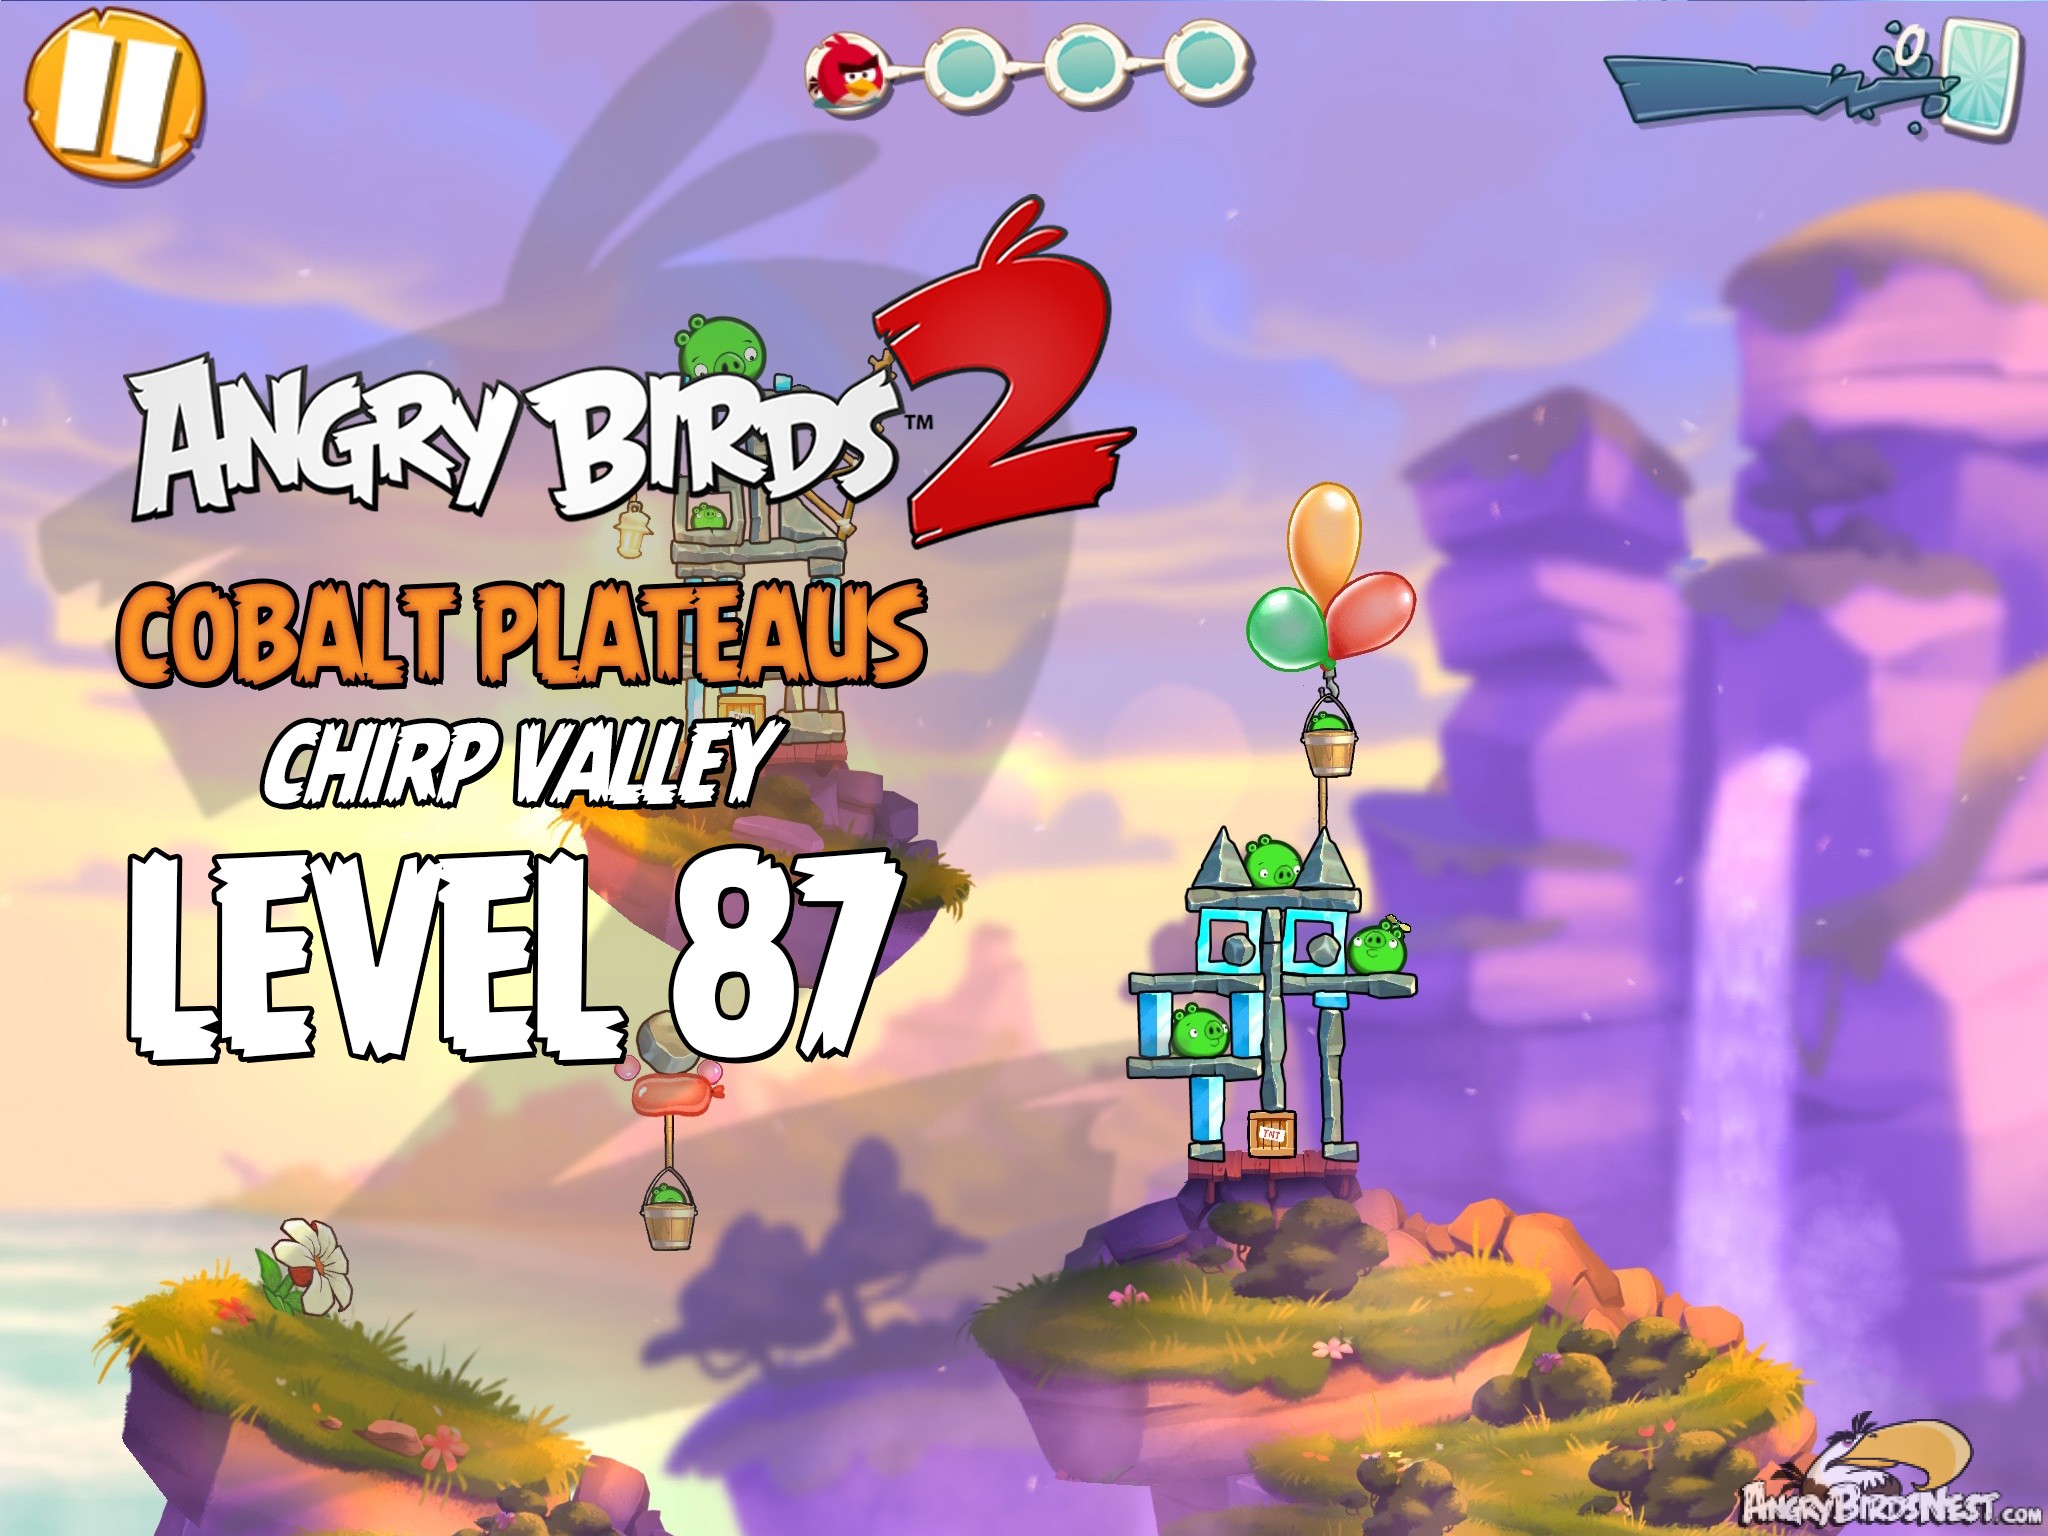 Angry Birds 2 Cobalt Plateaus Chirp Valley Level 87